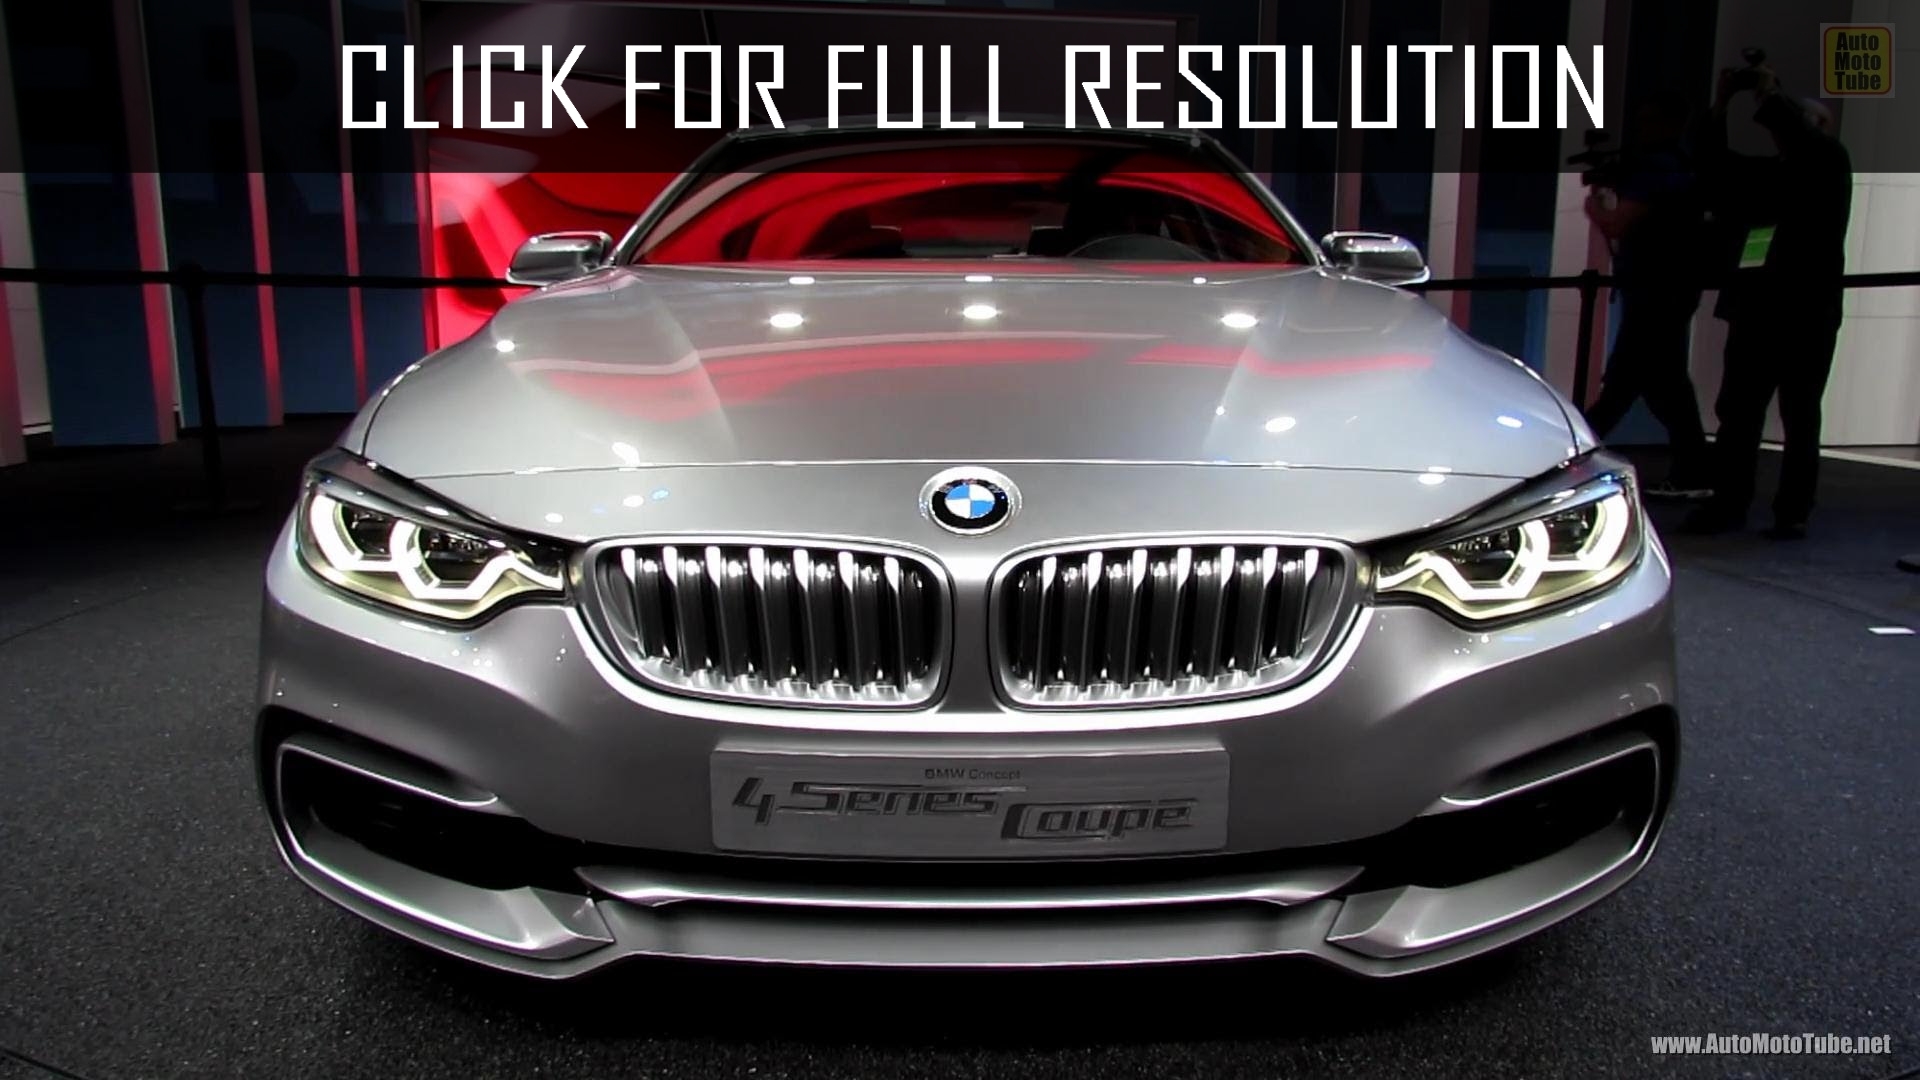 Bmw 7 Series Redesign